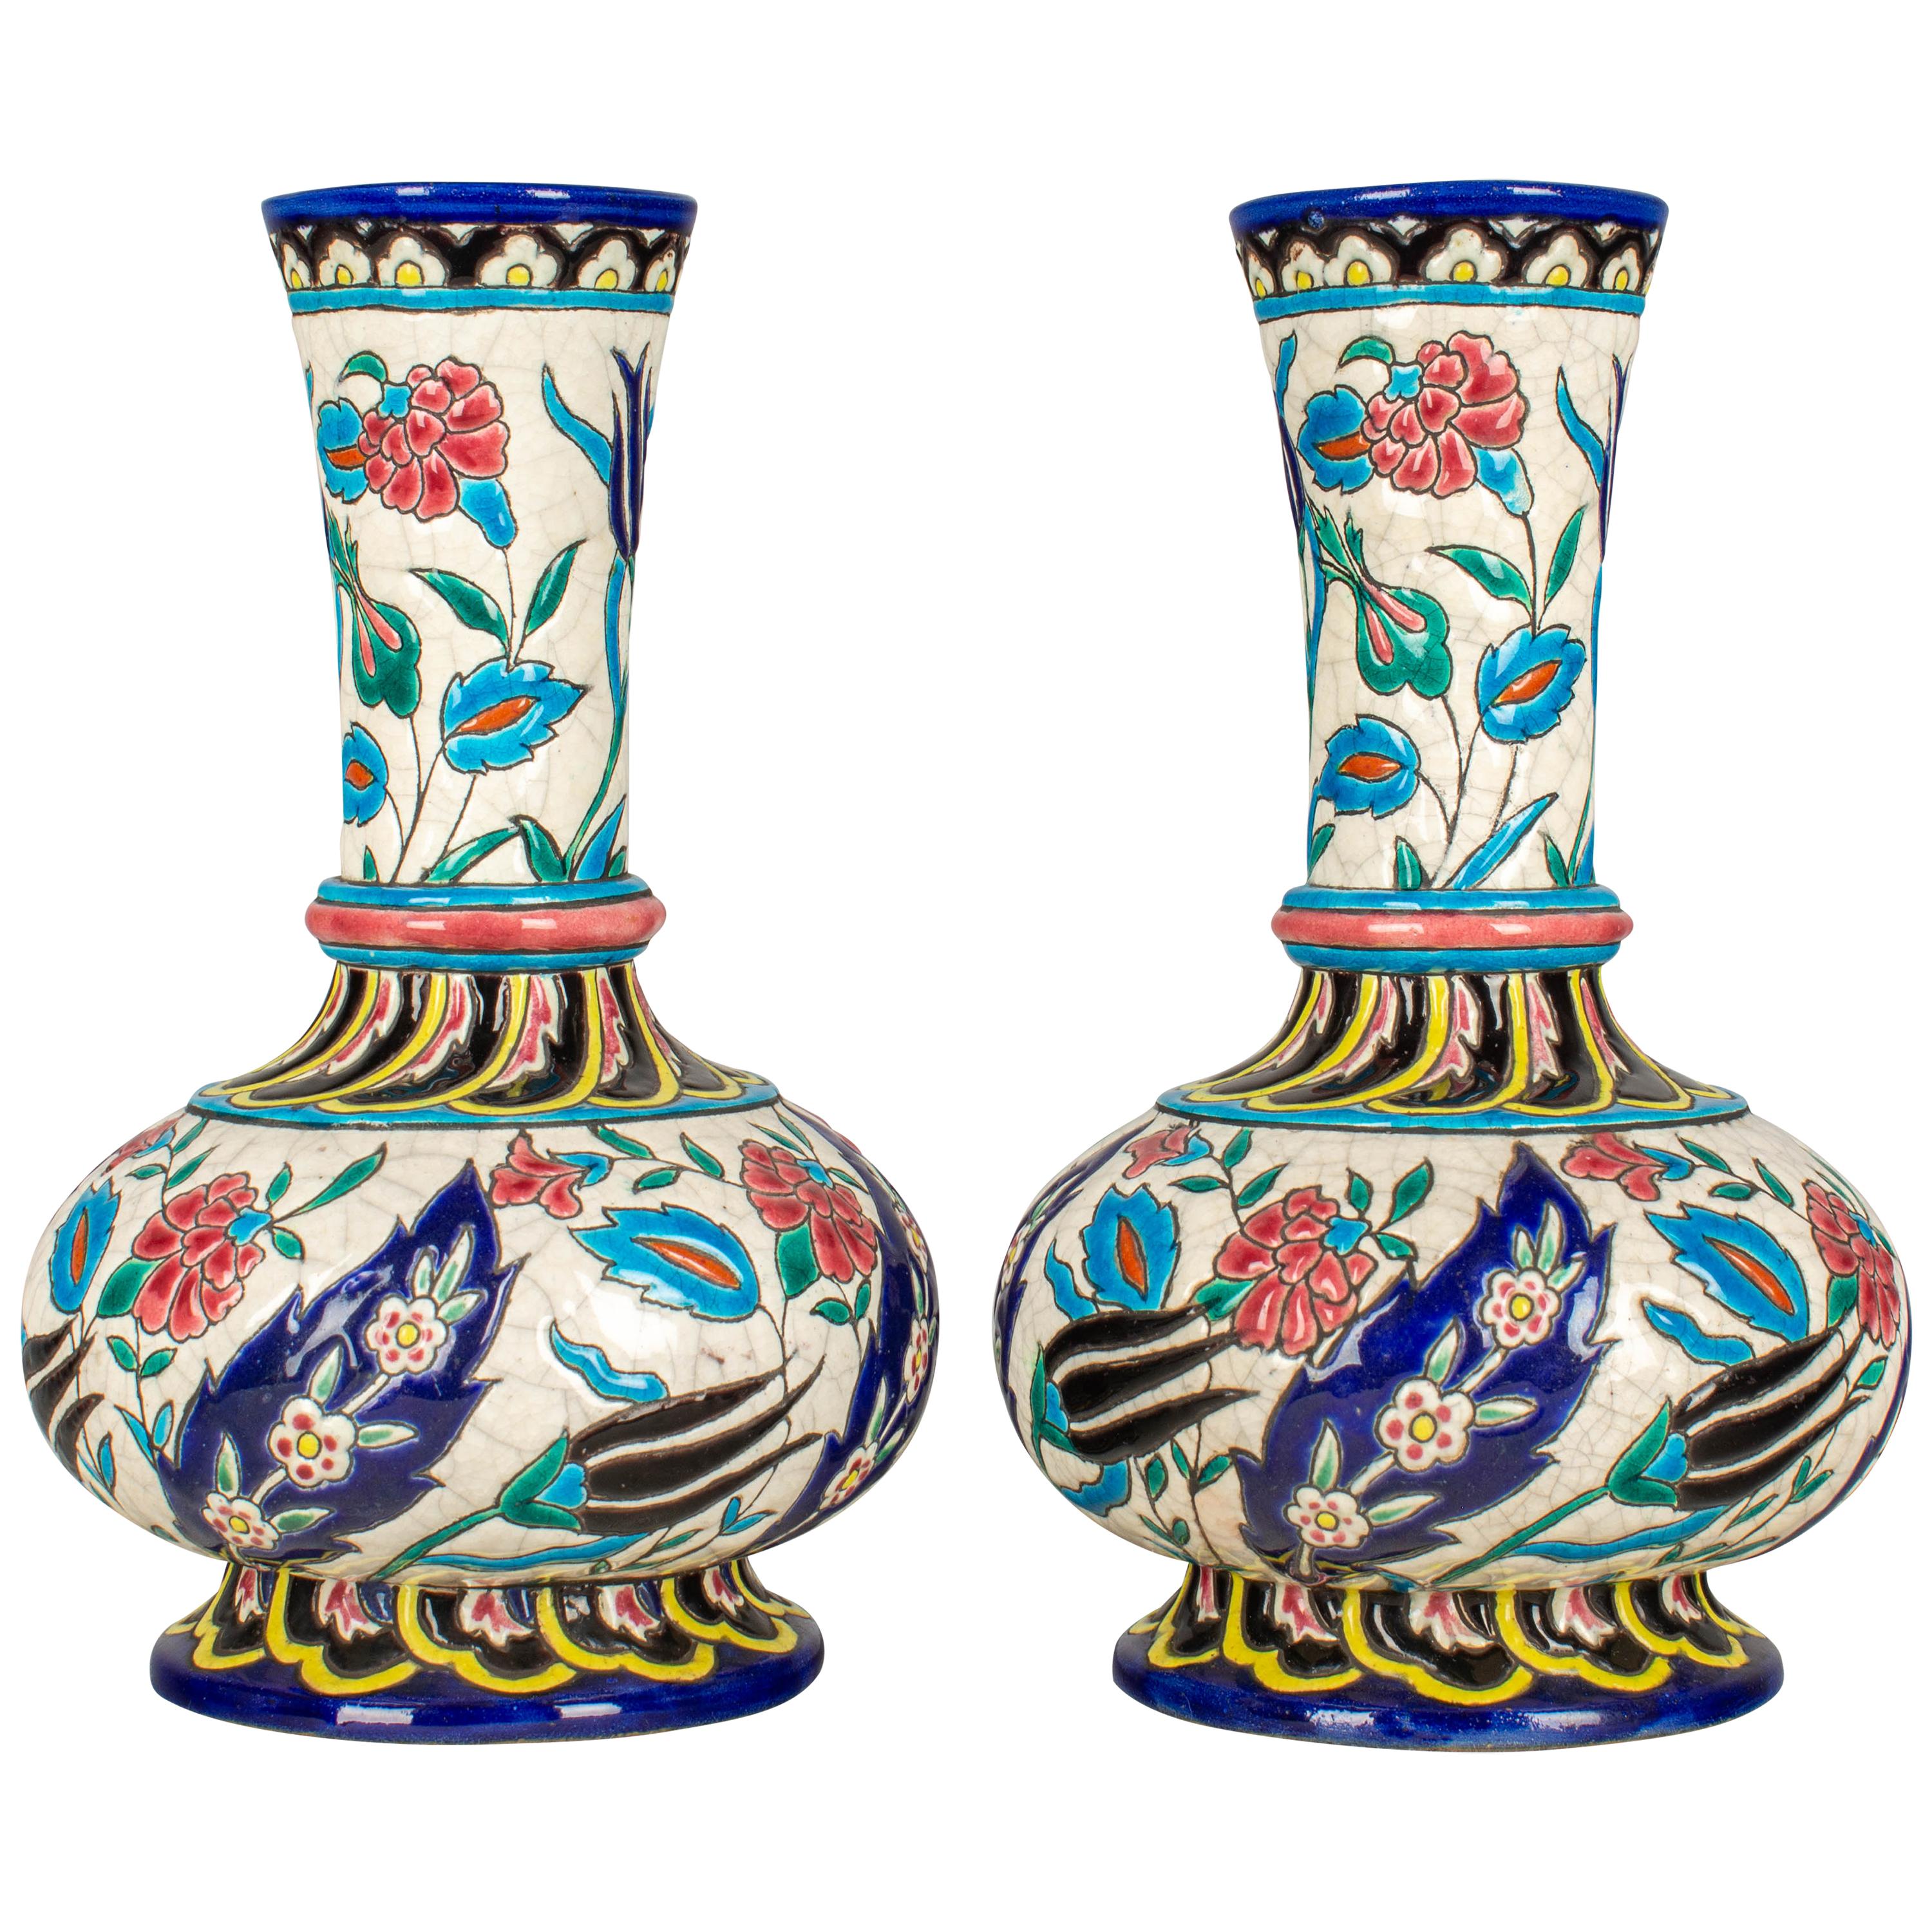 French Longwy Ceramic Cloisonné Vases, Pair of the 19th Century